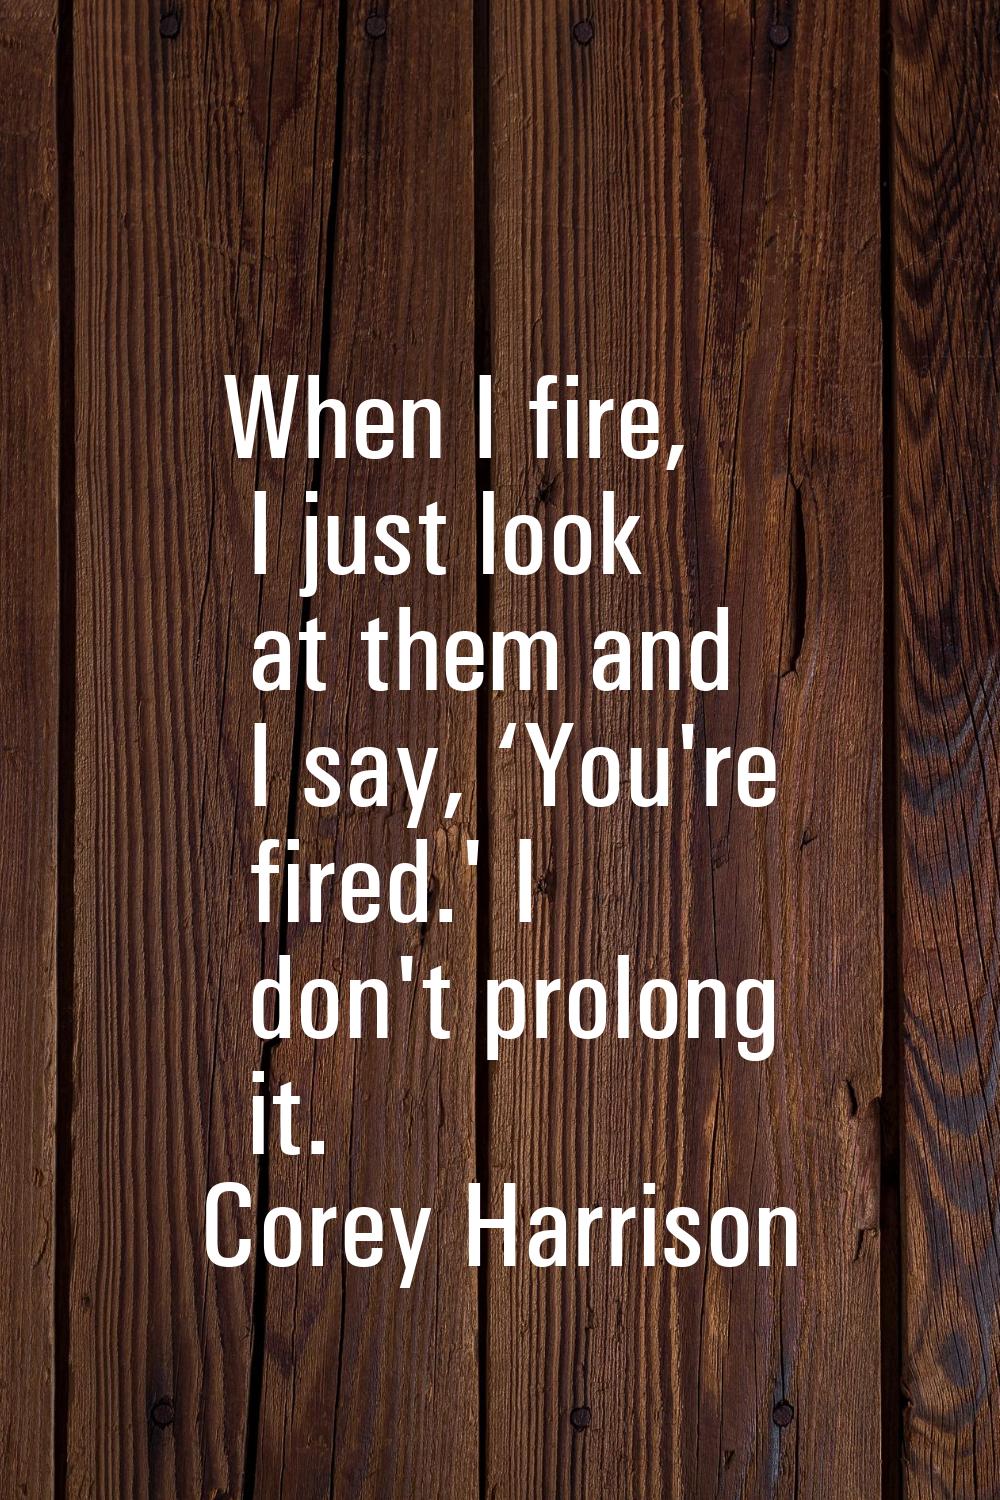 When I fire, I just look at them and I say, ‘You're fired.' I don't prolong it.